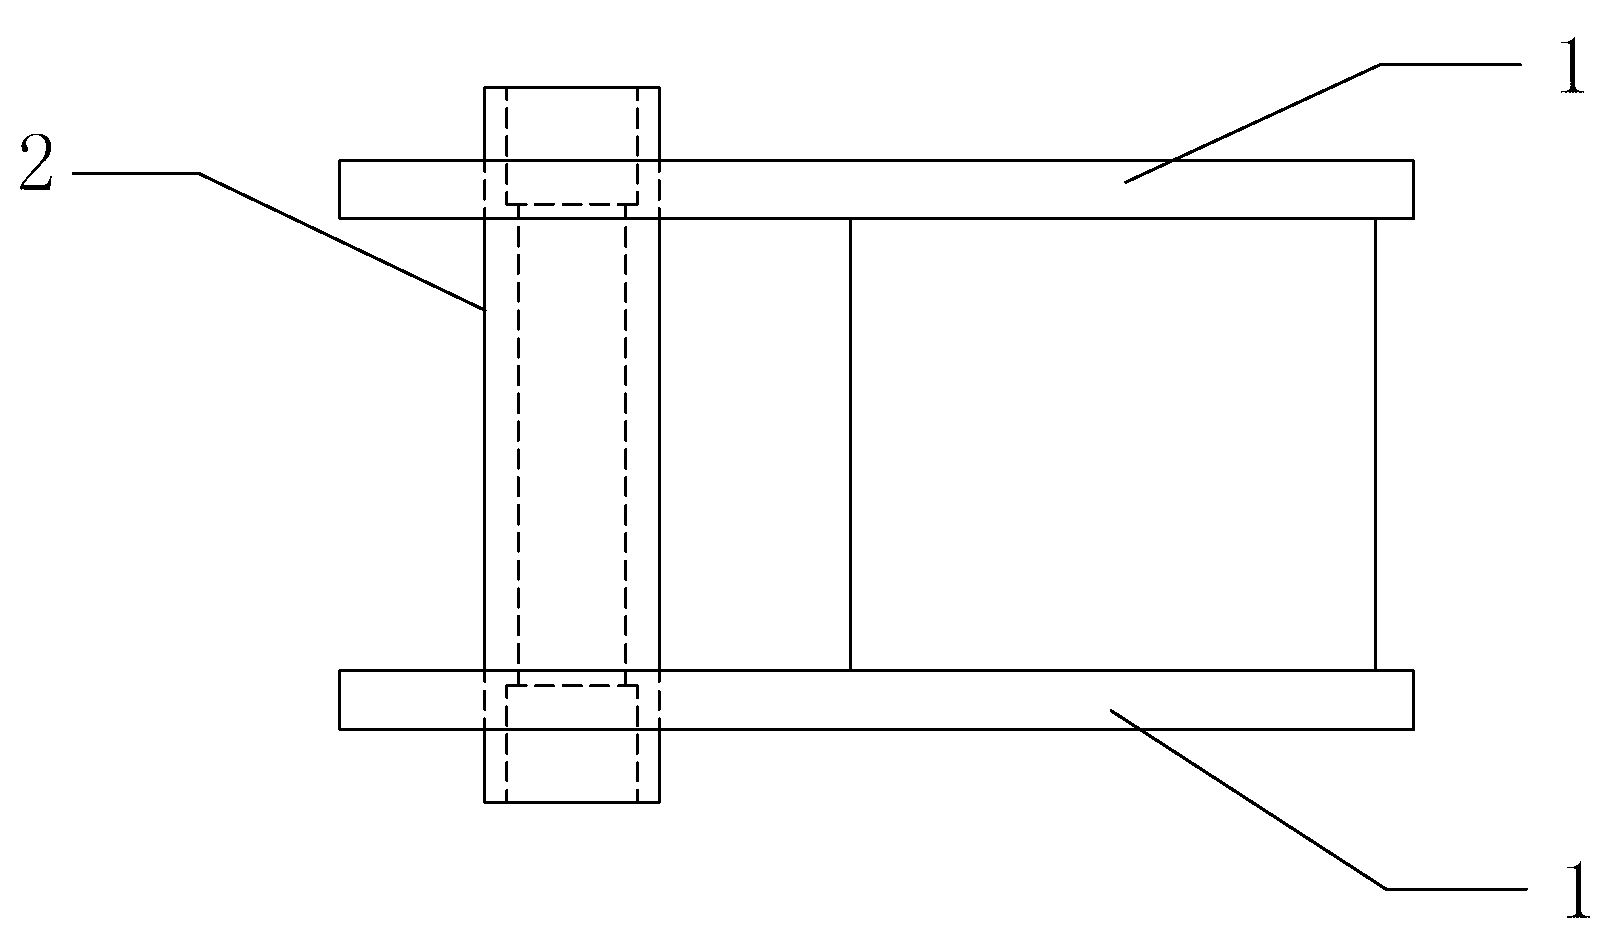 Processing method for inter-arm connection component of lifting platform